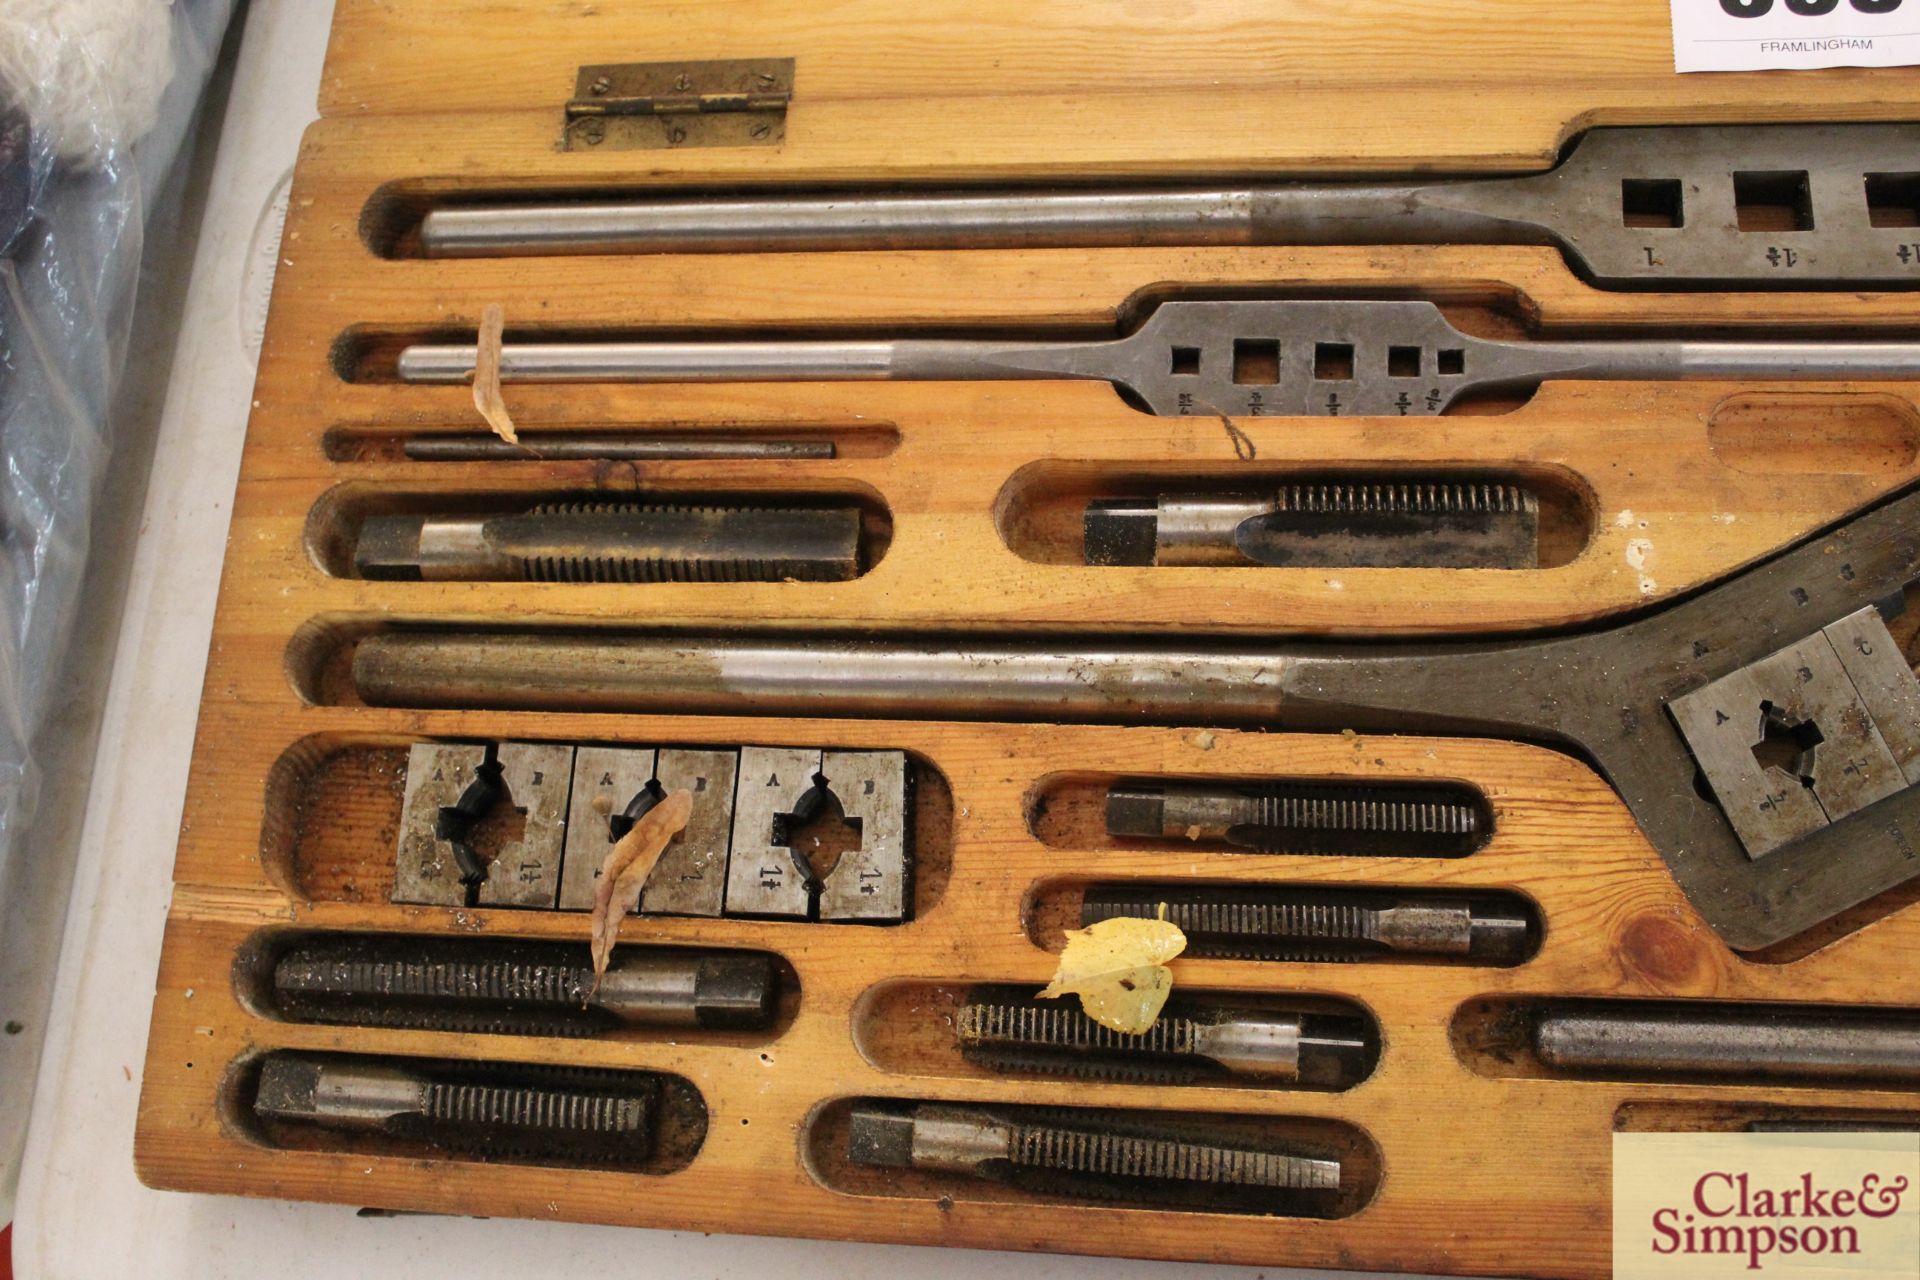 Large imperial tap and die set in wooden case. - Image 2 of 4